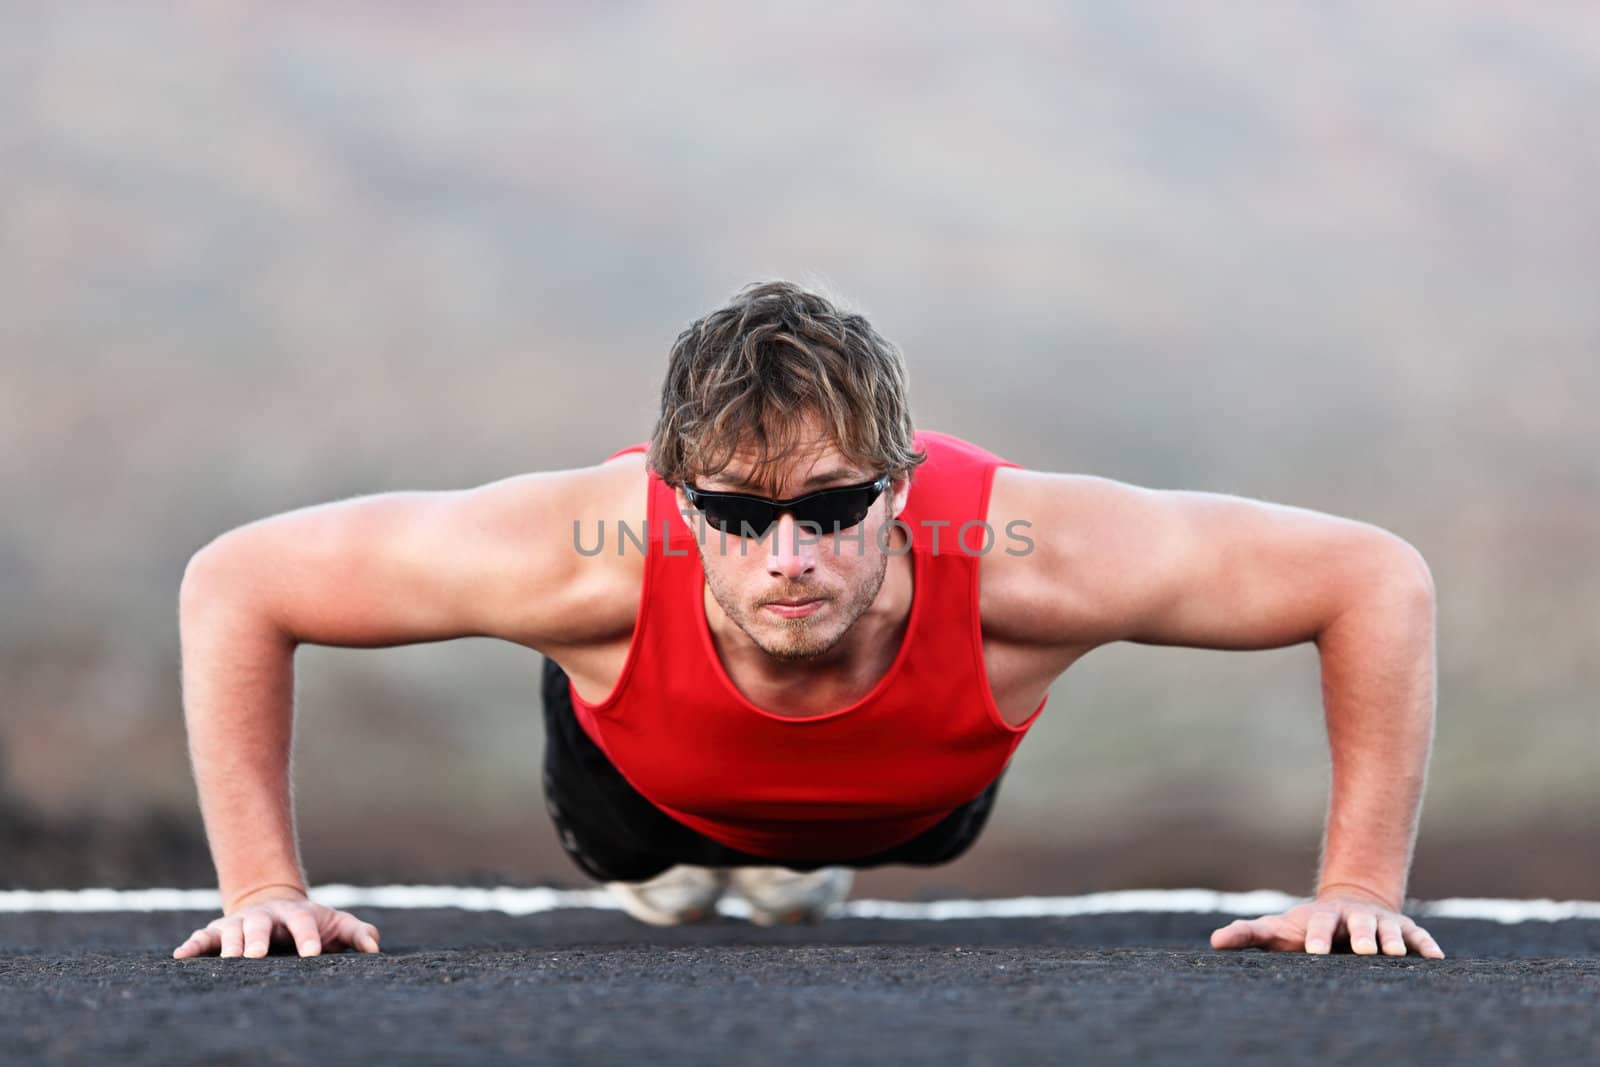 Exercise man training push ups doing strength training outdoors. Fit muscular male fitness model.